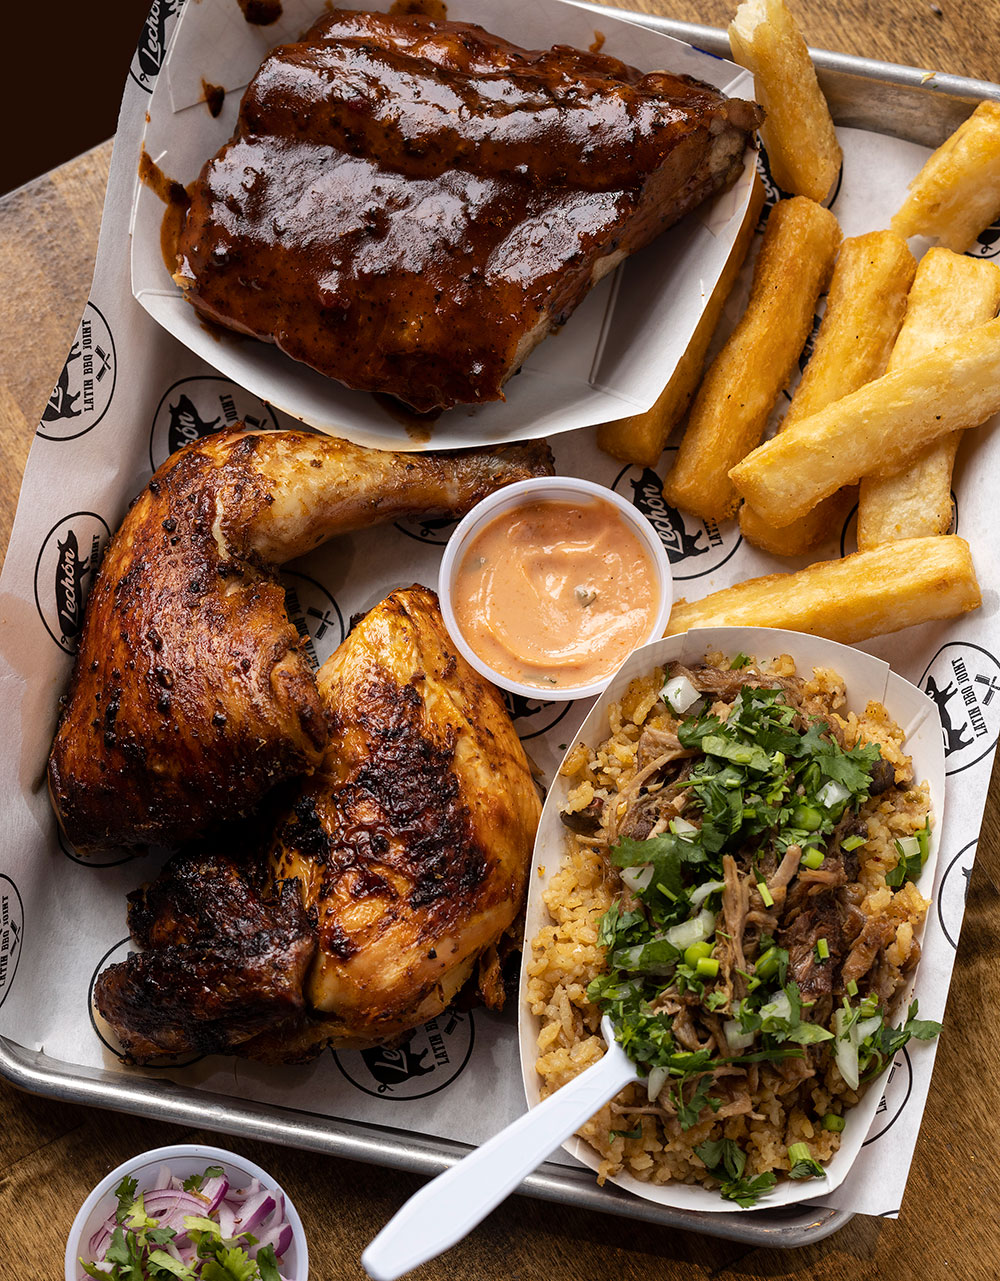 There is something for everyone at Lechon Latin BBQ, like peruvian-style rotisserie chicken, barbecued ribs with jerk sauce, and plenty of sides.